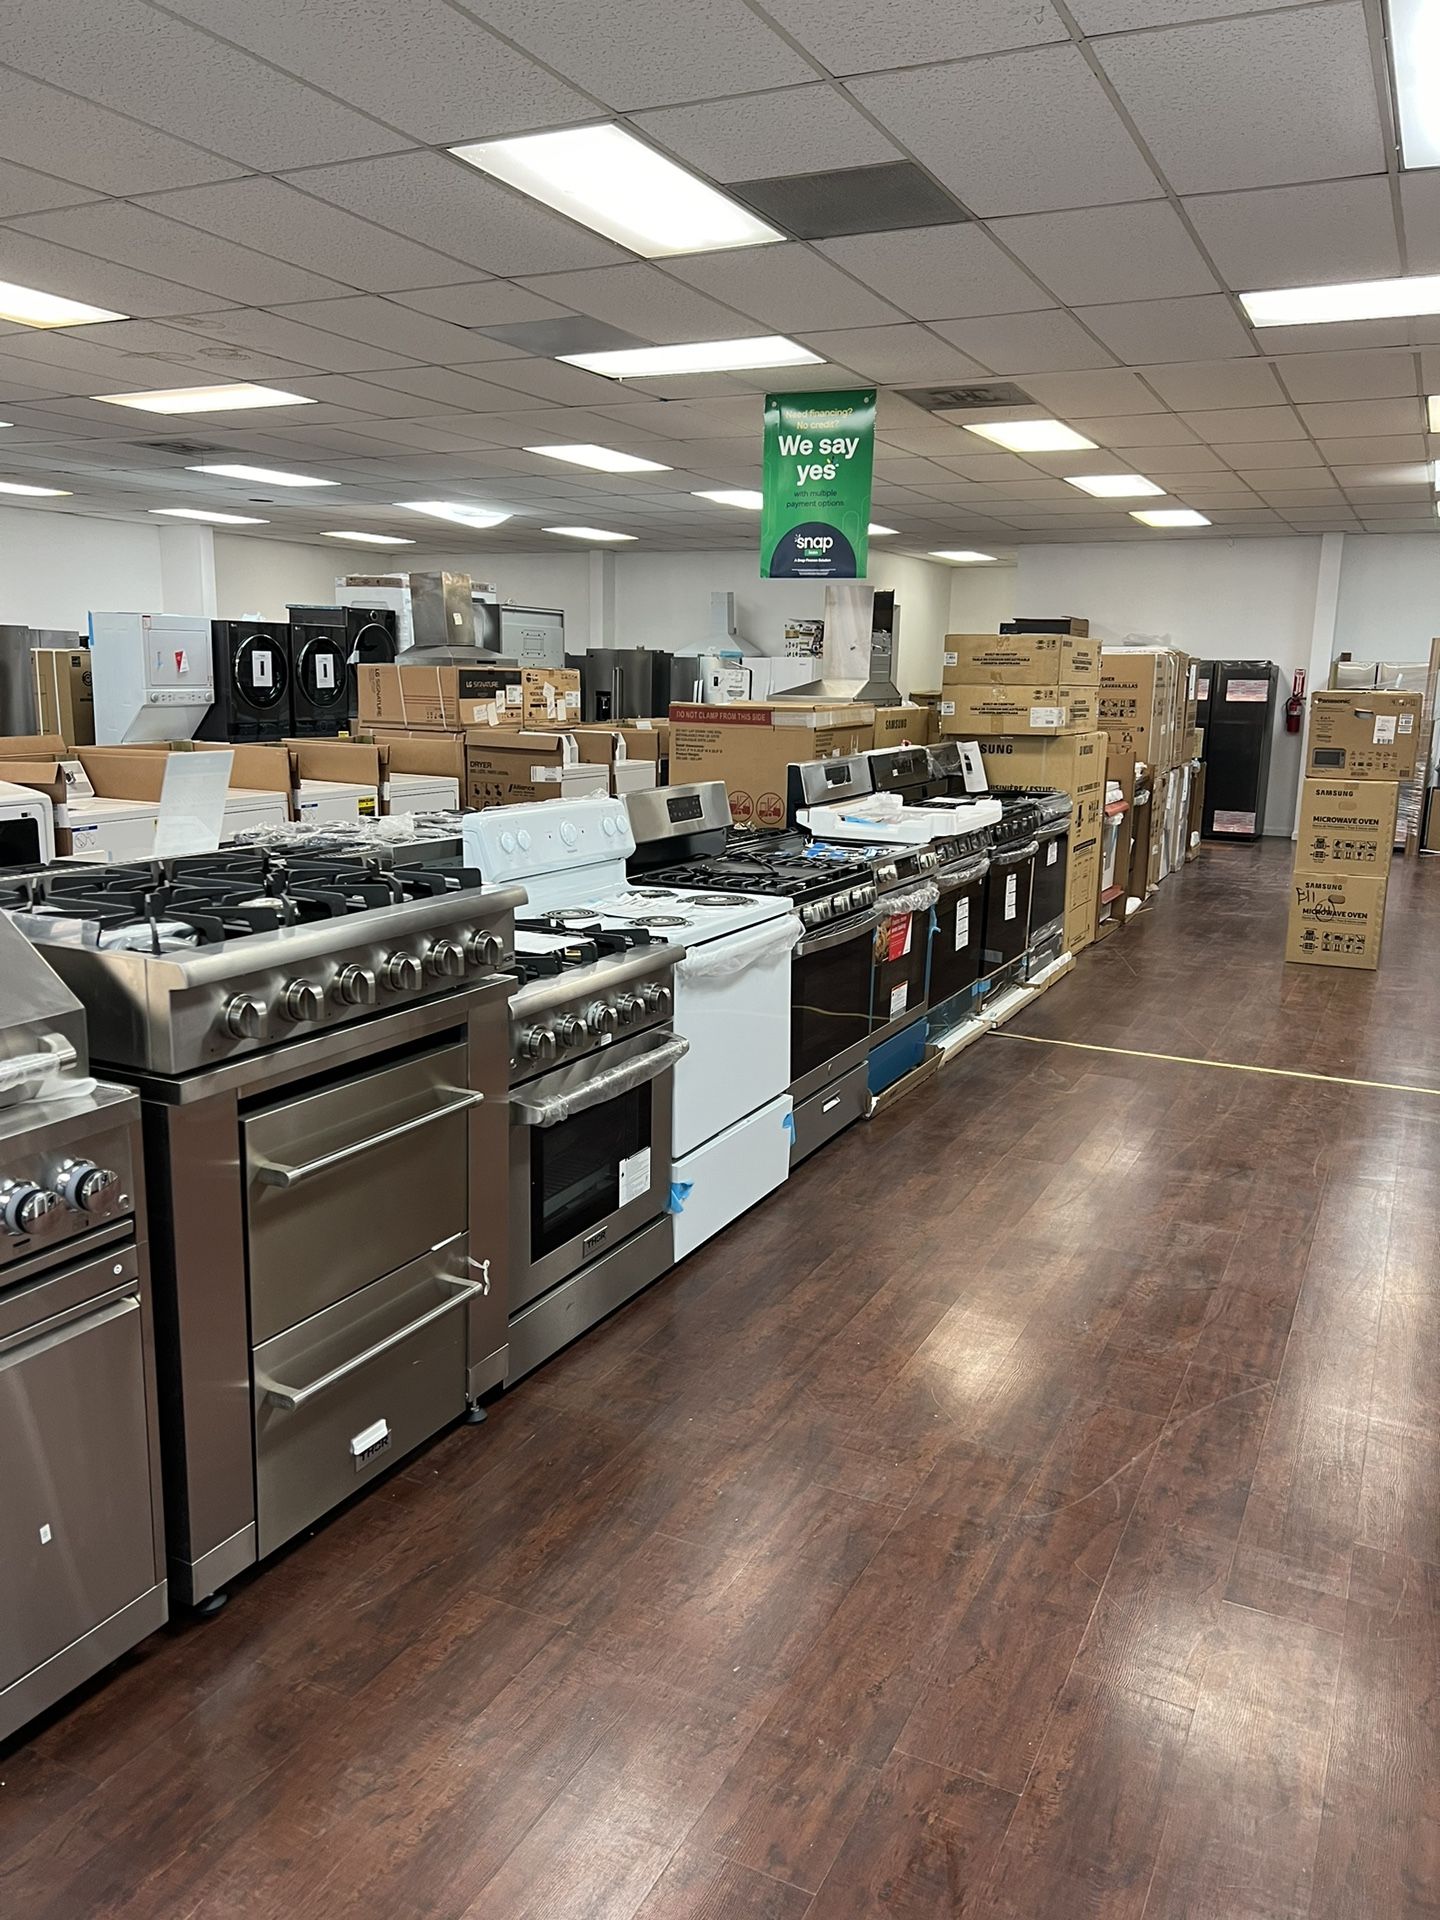 ALL APPLIANCES AVAILABLE 